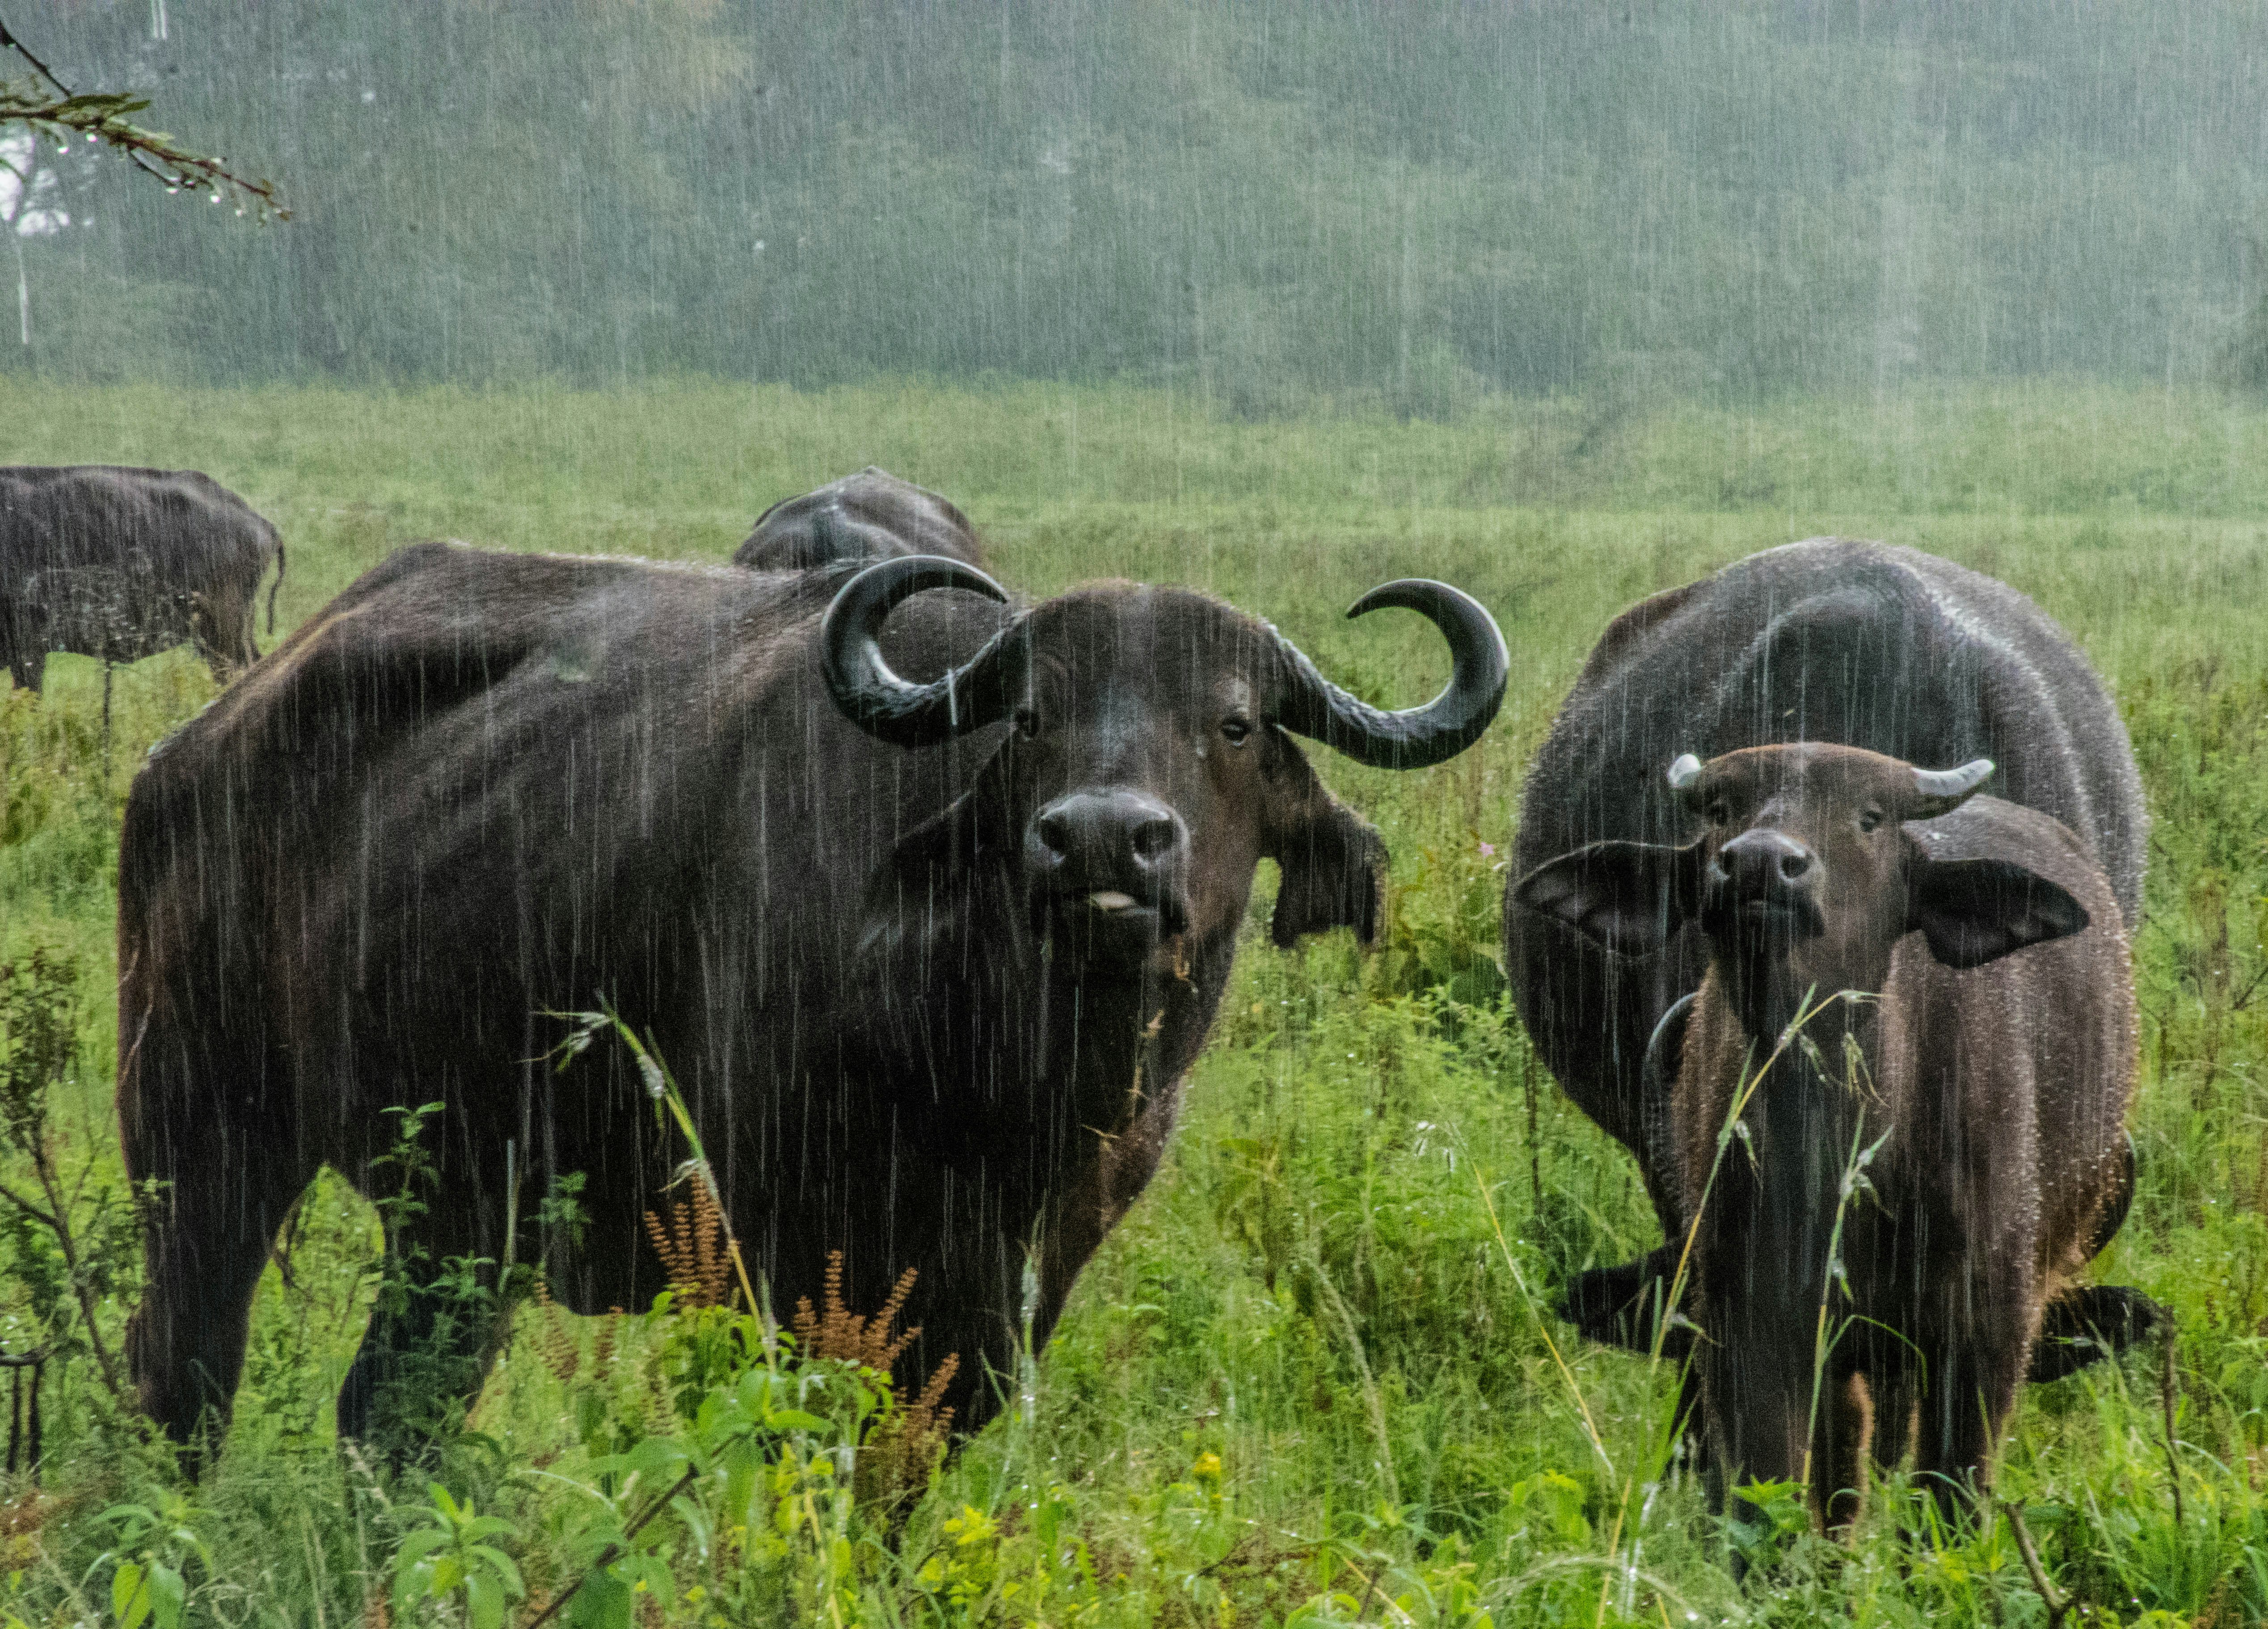 Musk ox and calf in the rain